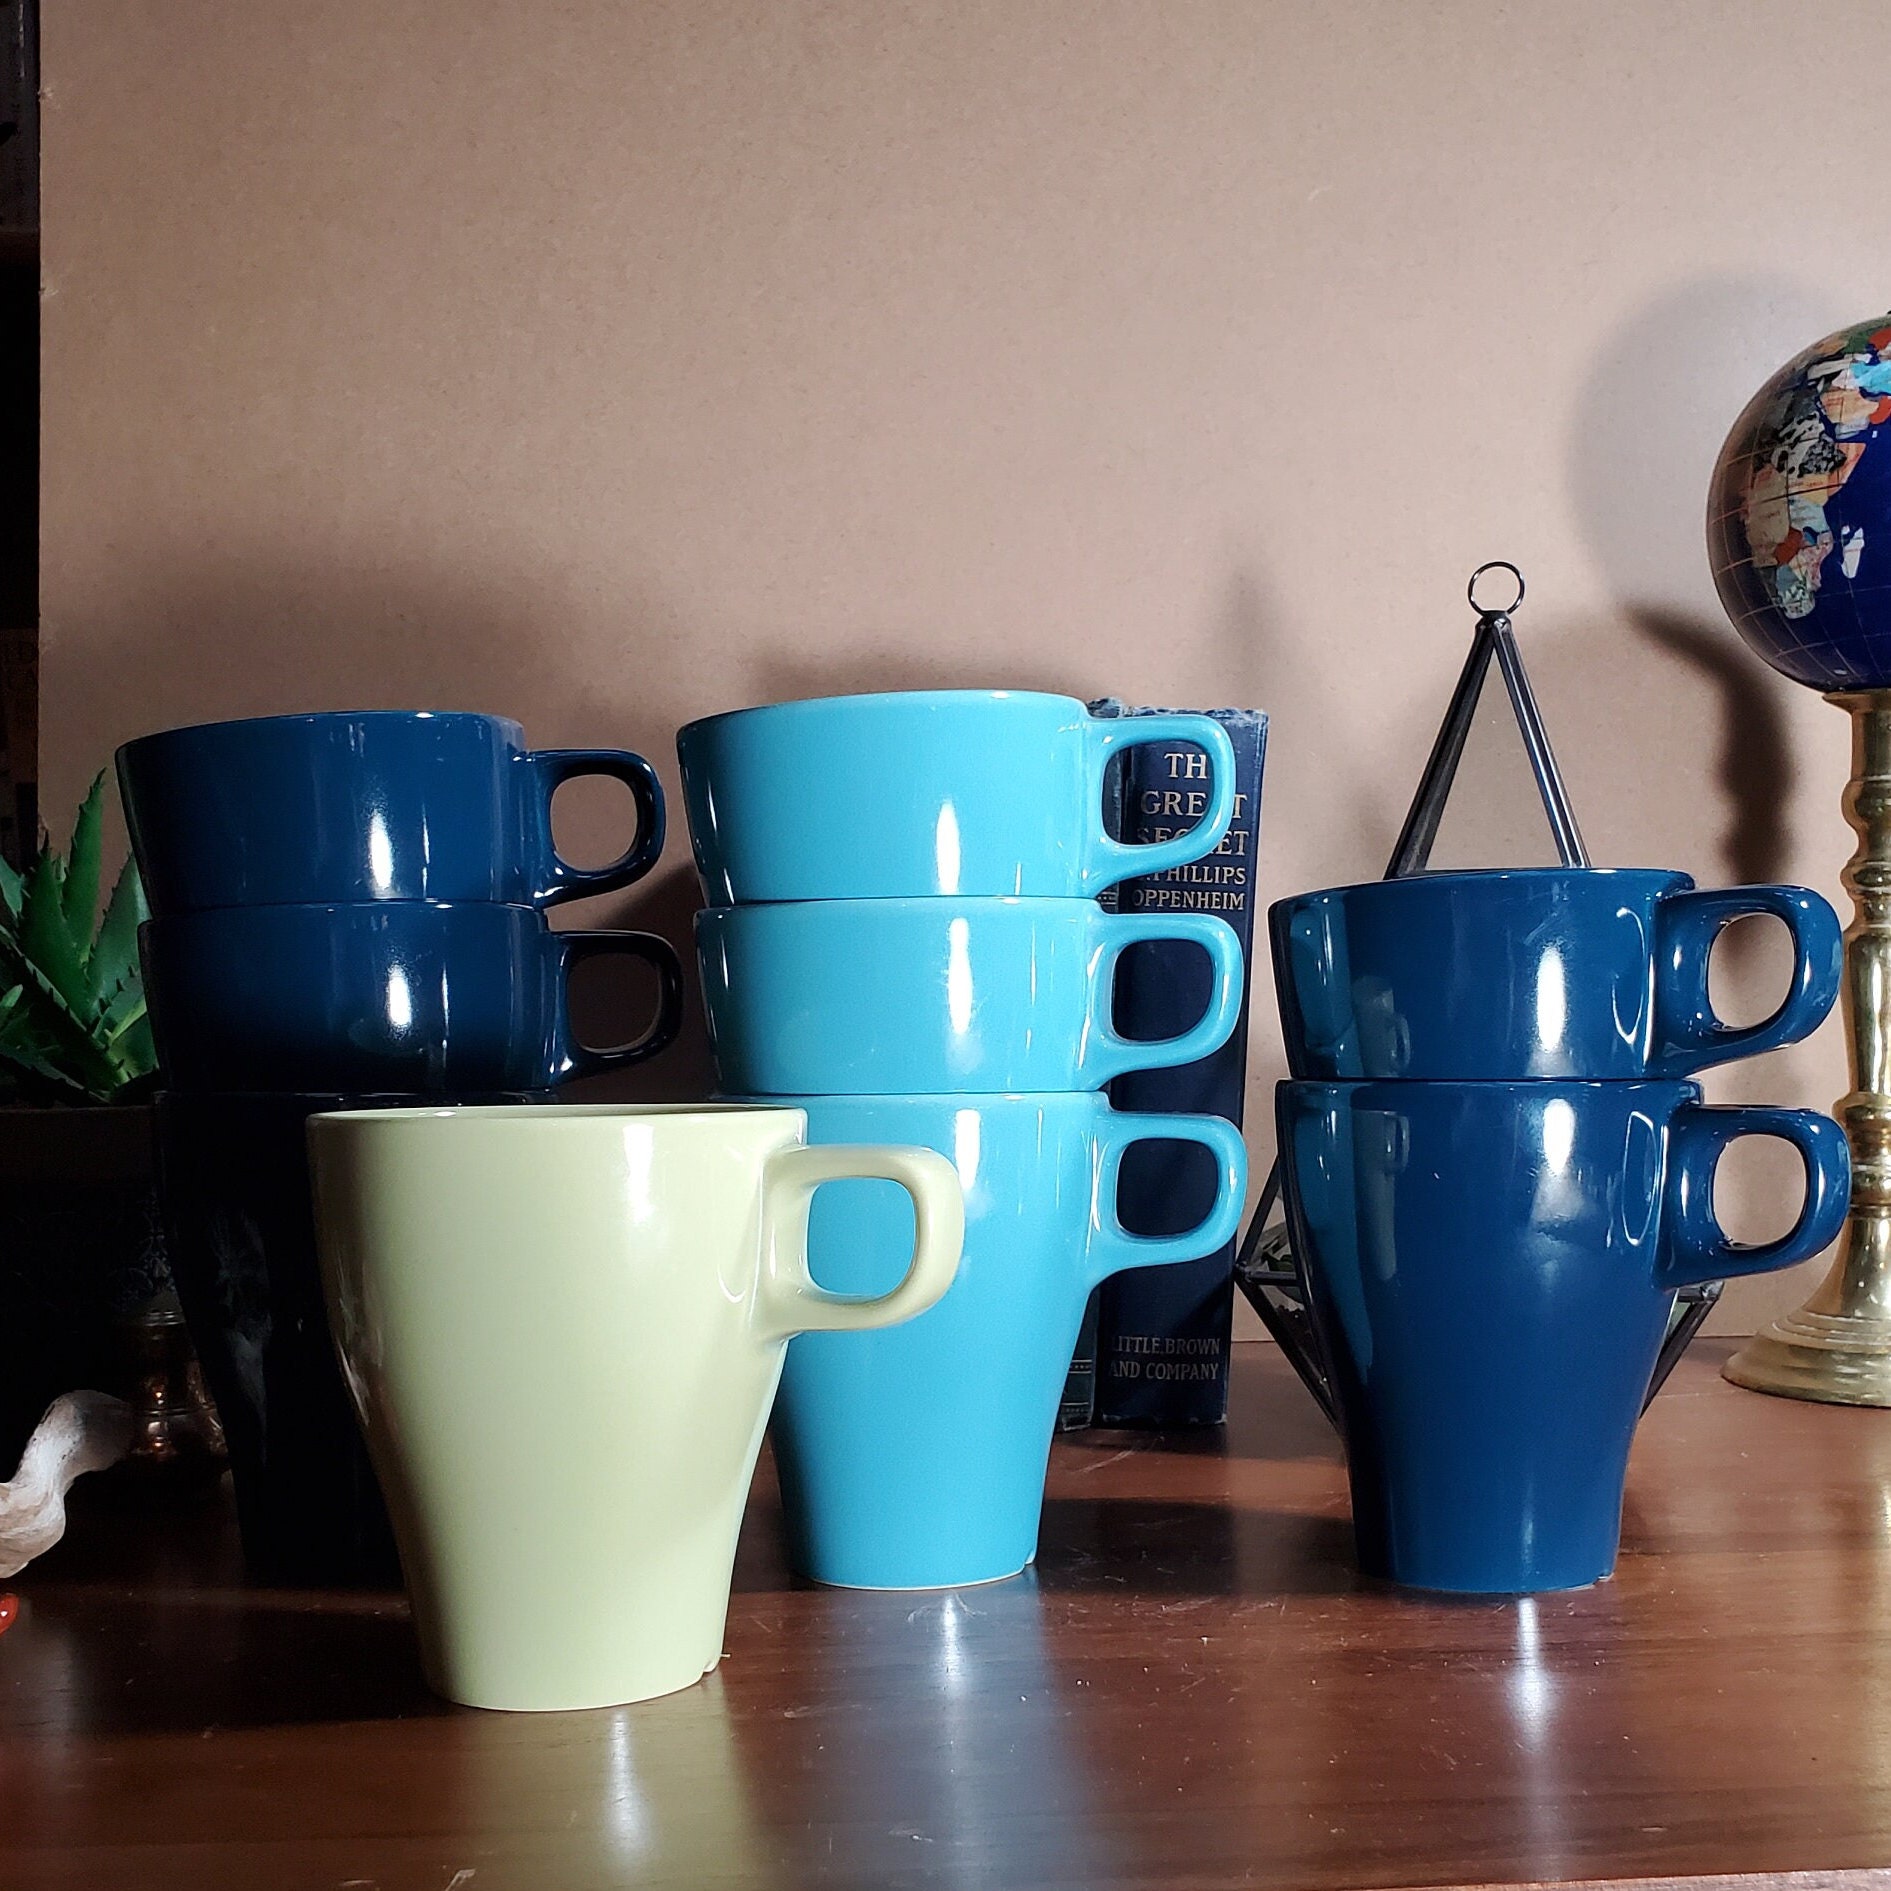 IKEA White Stackable Coffee Mugs New - 50 Cents Each - 2 for $ 1